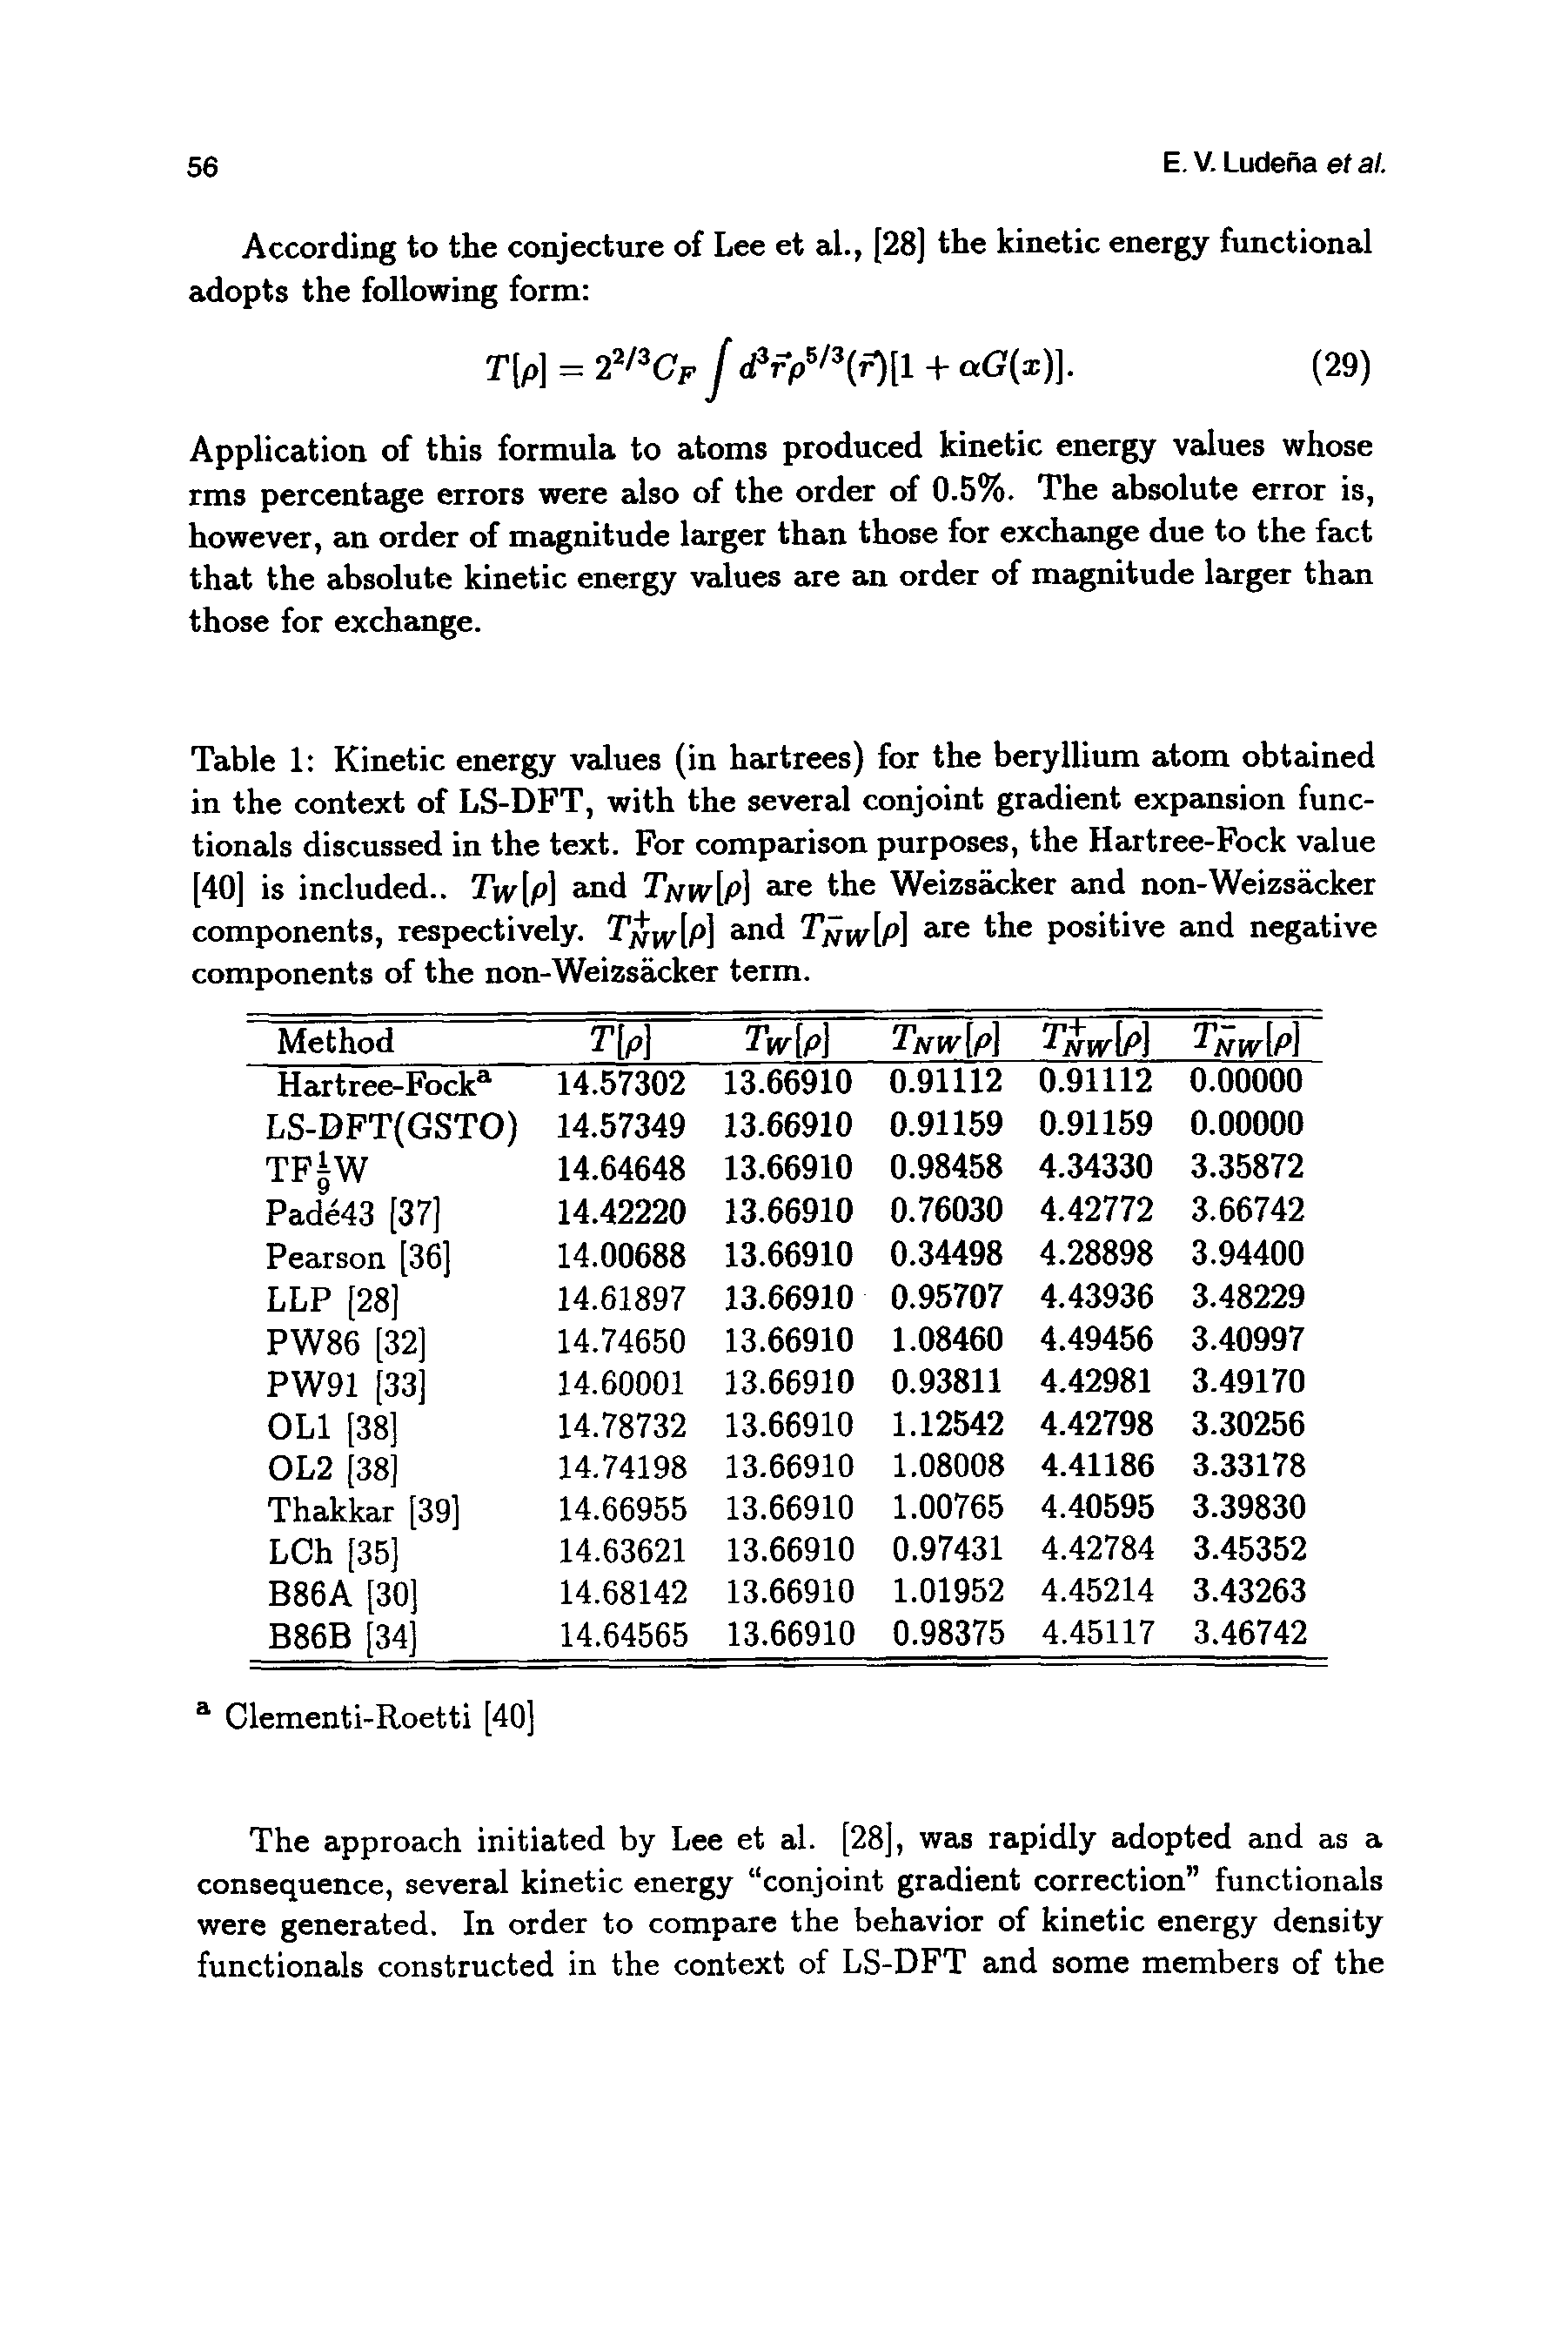 Table 1 Kinetic energy values (in hartrees) for the beryllium atom obtained in the context of LS-DFT, with the several conjoint gradient expansion functionals discussed in the text. For comparison purposes, the Hartree-Fock value [40] is included.. Tjy[p] and 7Vw[p] are the Weizsacker and non-Weizsacker components, respectively. TjJwIp] and Nwipl are the positive and negative components of the non-Weizsacker term.